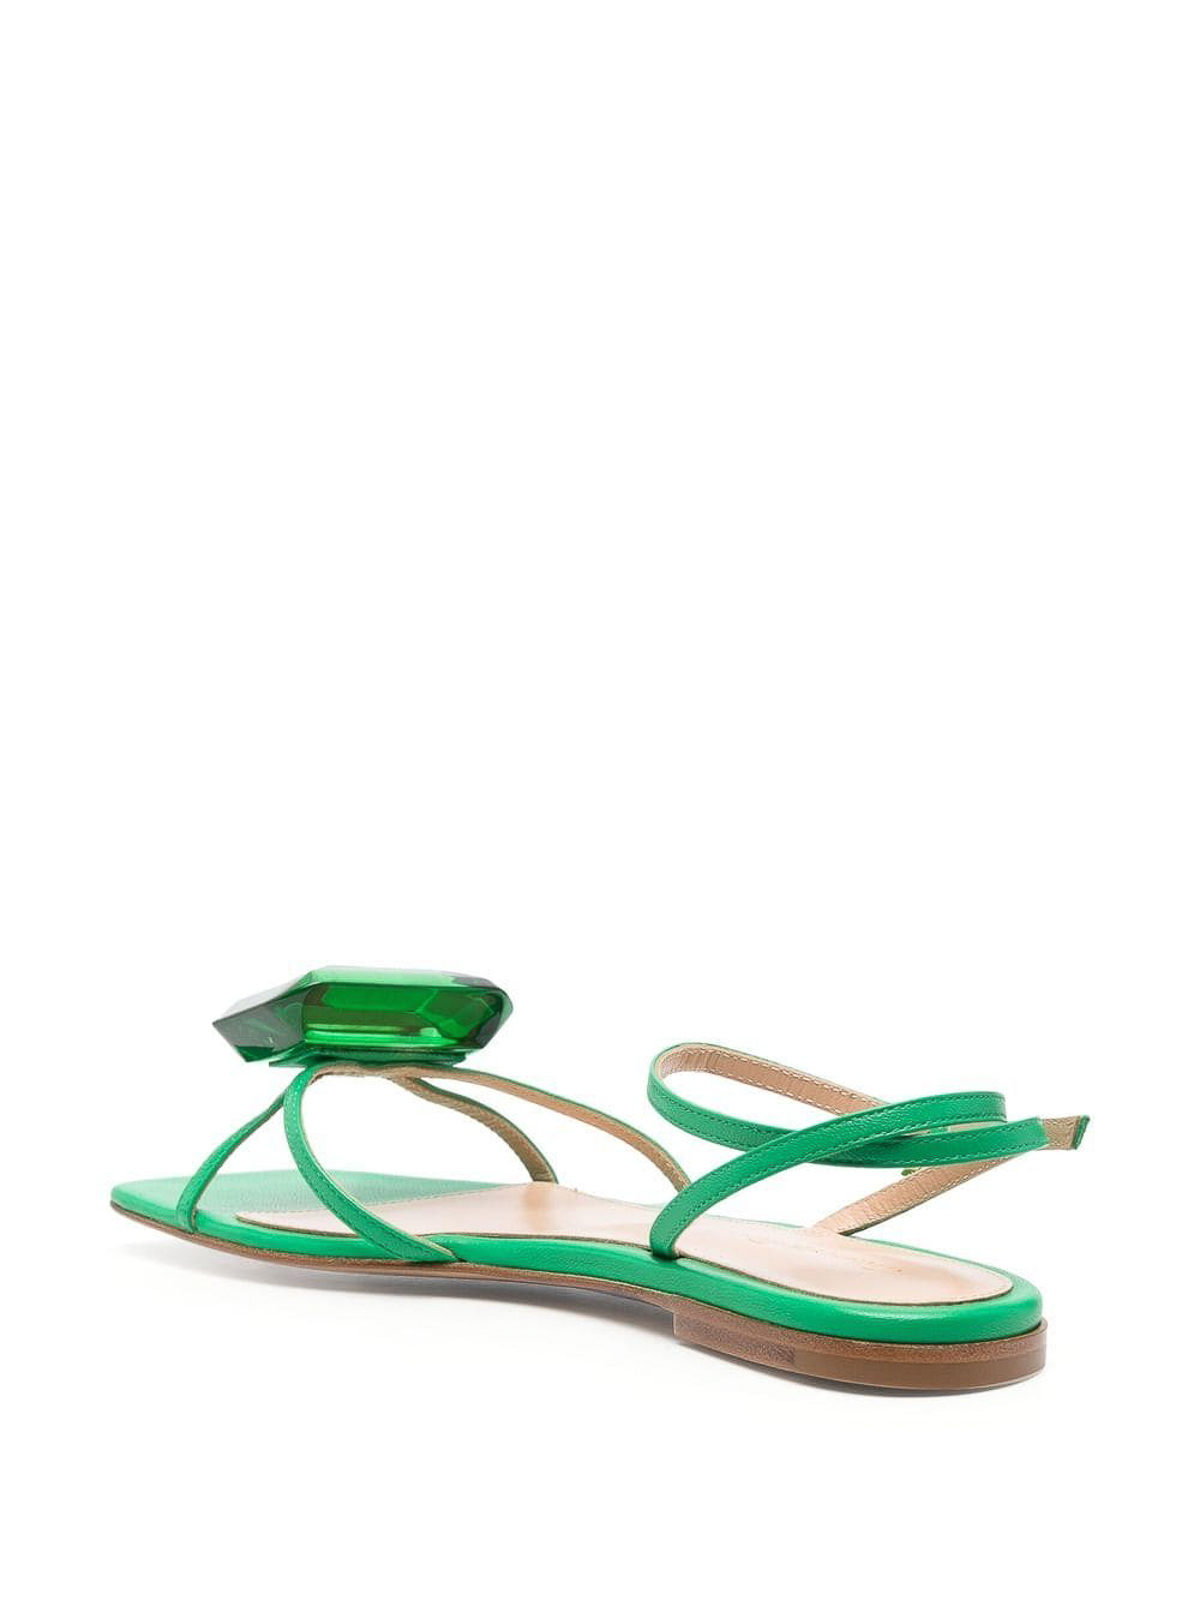 Shop Gianvito Rossi Jaipur Leather Sandals In Green